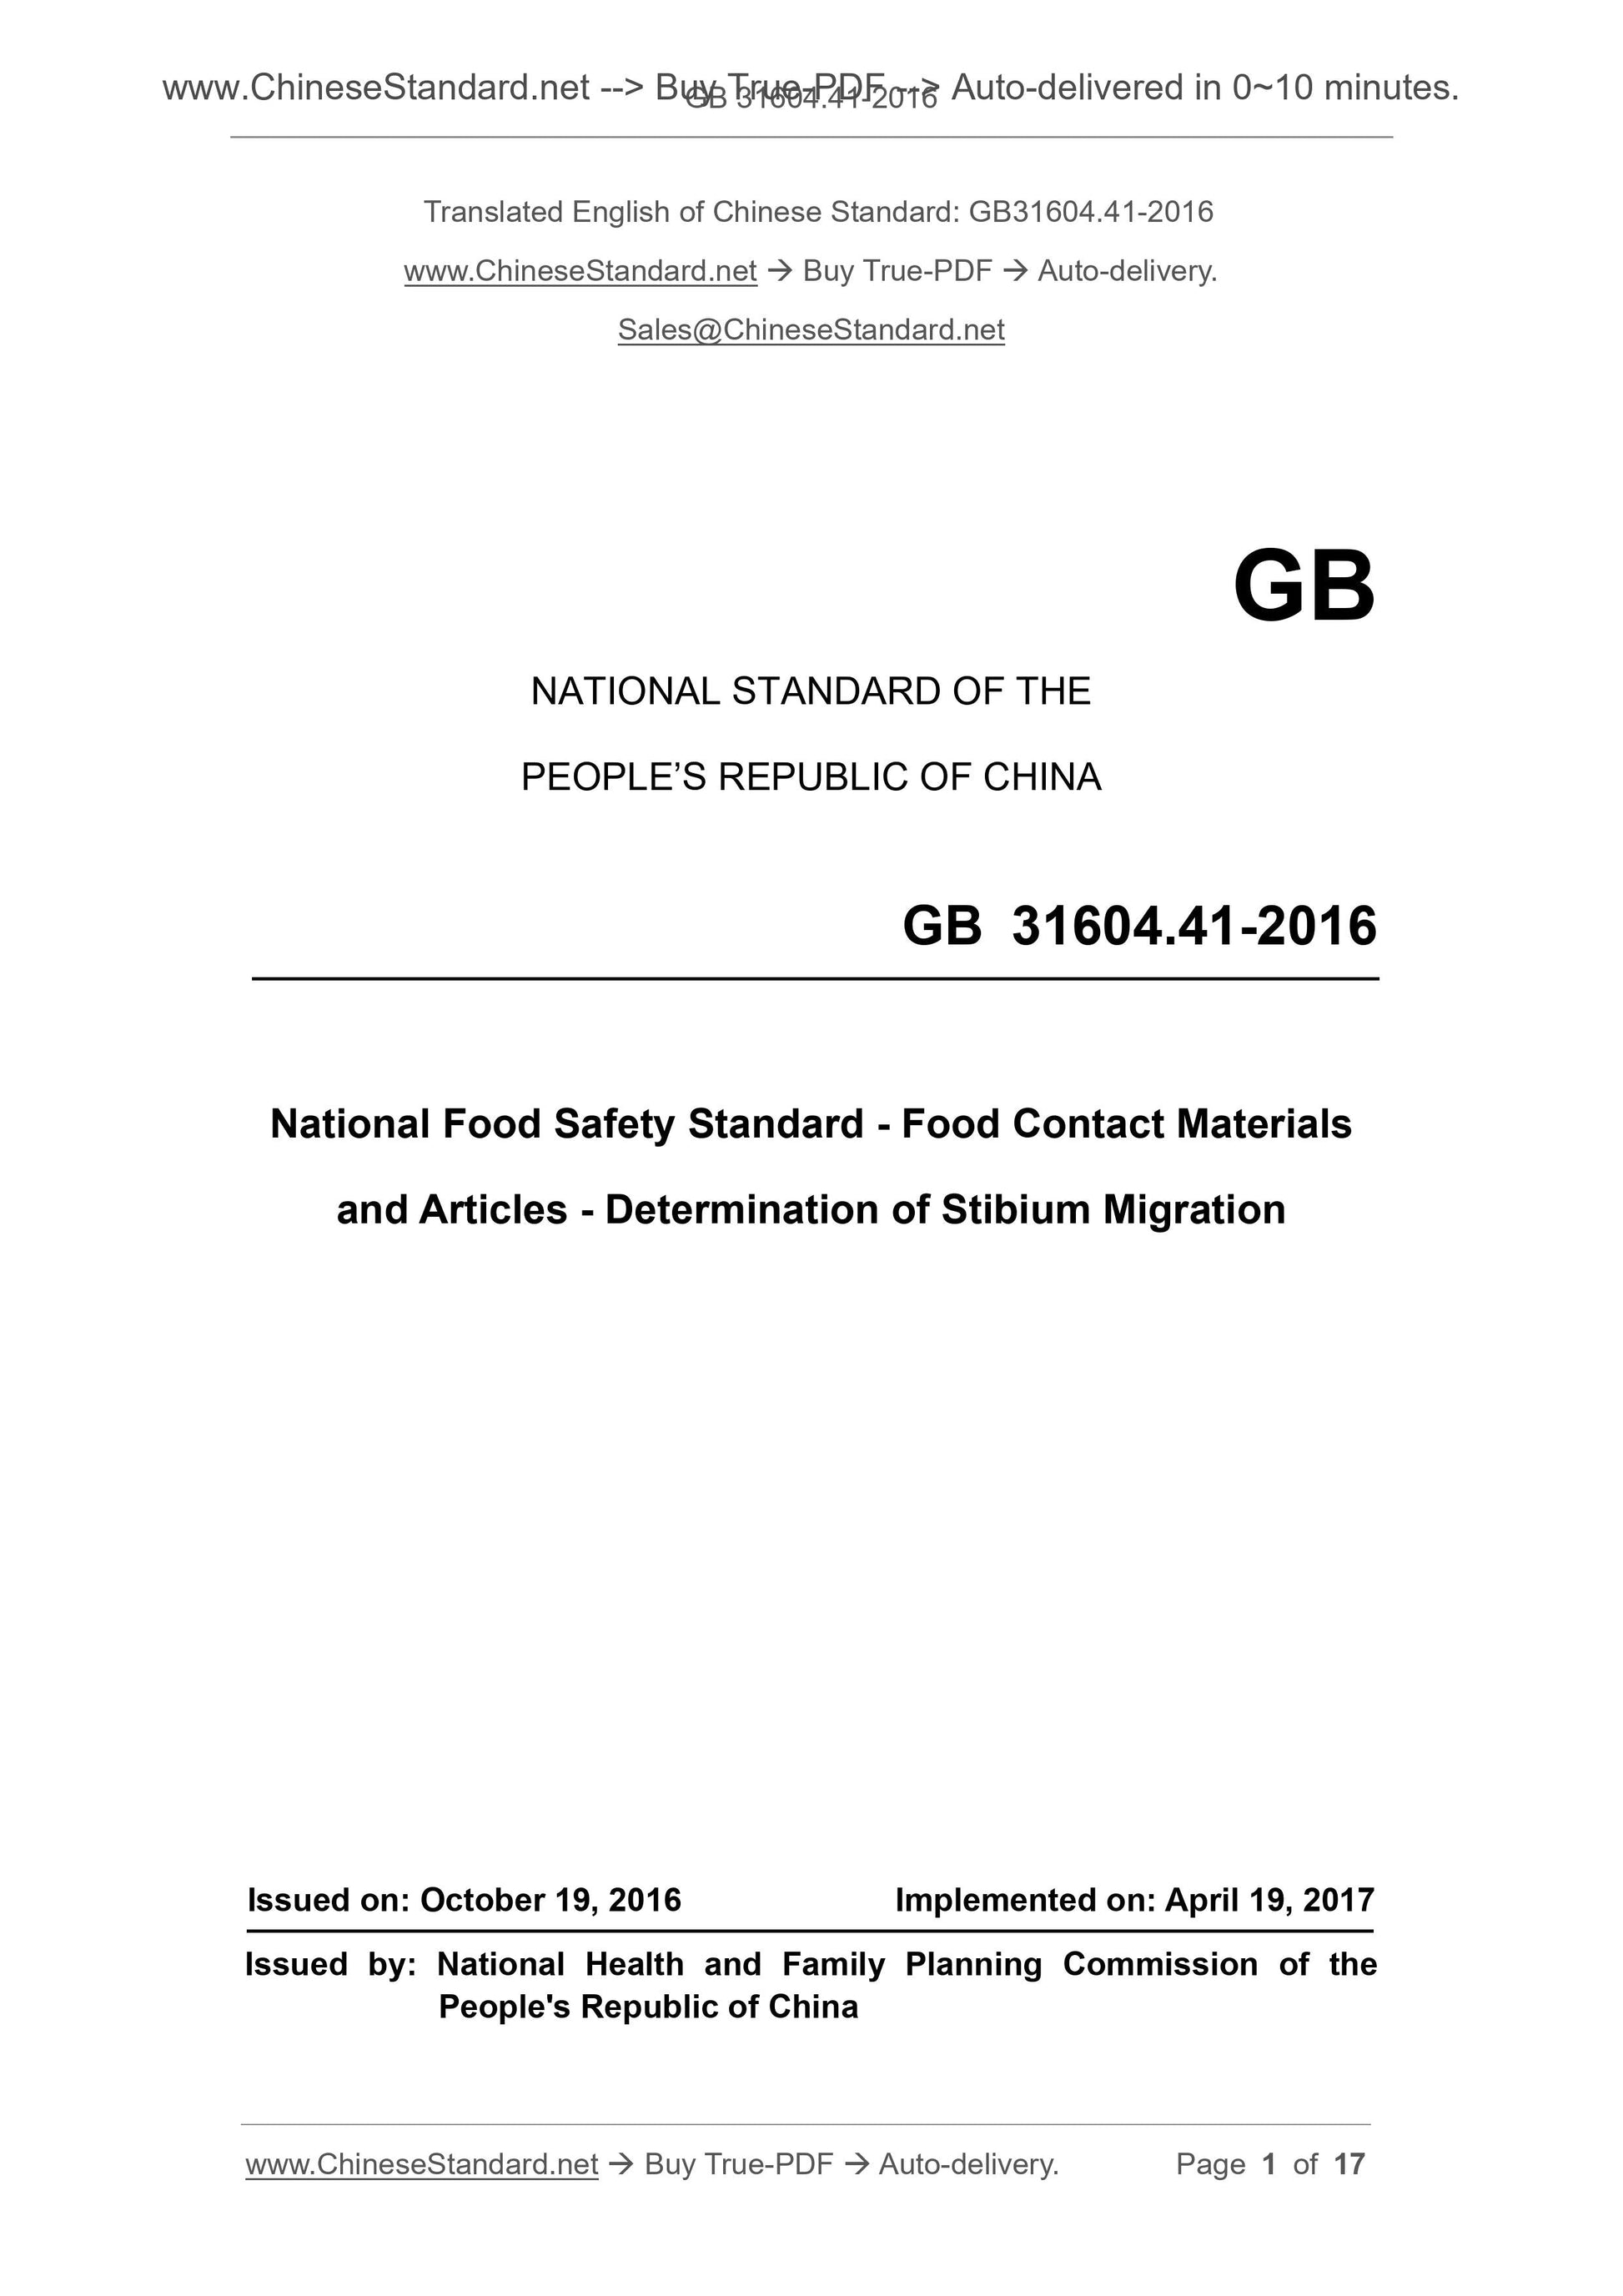 GB 31604.41-2016 Page 1